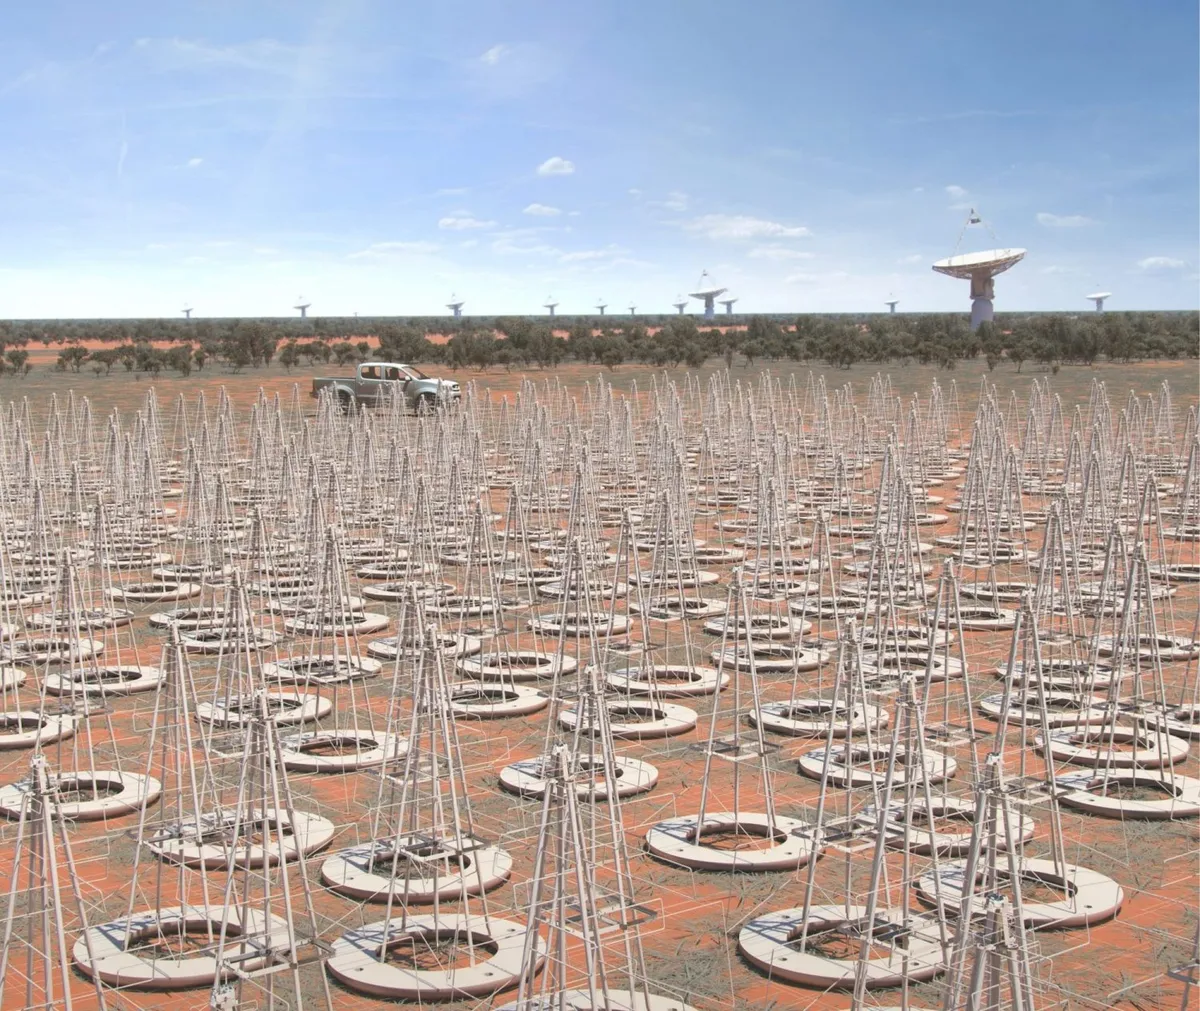 An artist's impression of the low frequency antennas that will form part of the Australian component of the Square Kilometre Array. Australia will initially host more than 130,000 SKA antennas, with the goal of expanding to a million. Credit: SKA Organisation